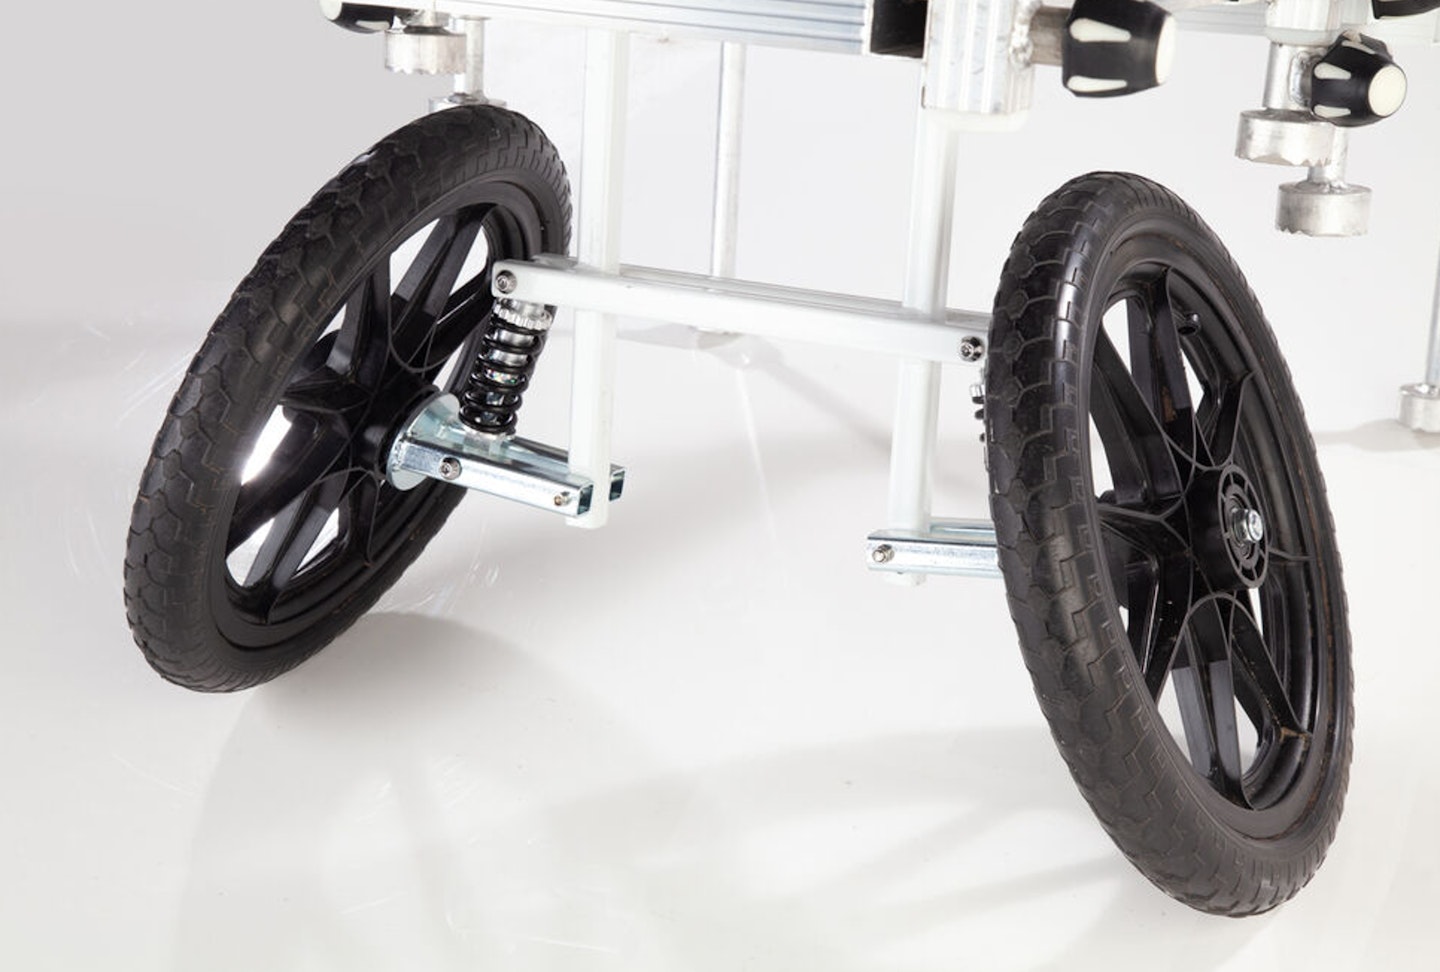 Four-wheel and powered wheel kit options